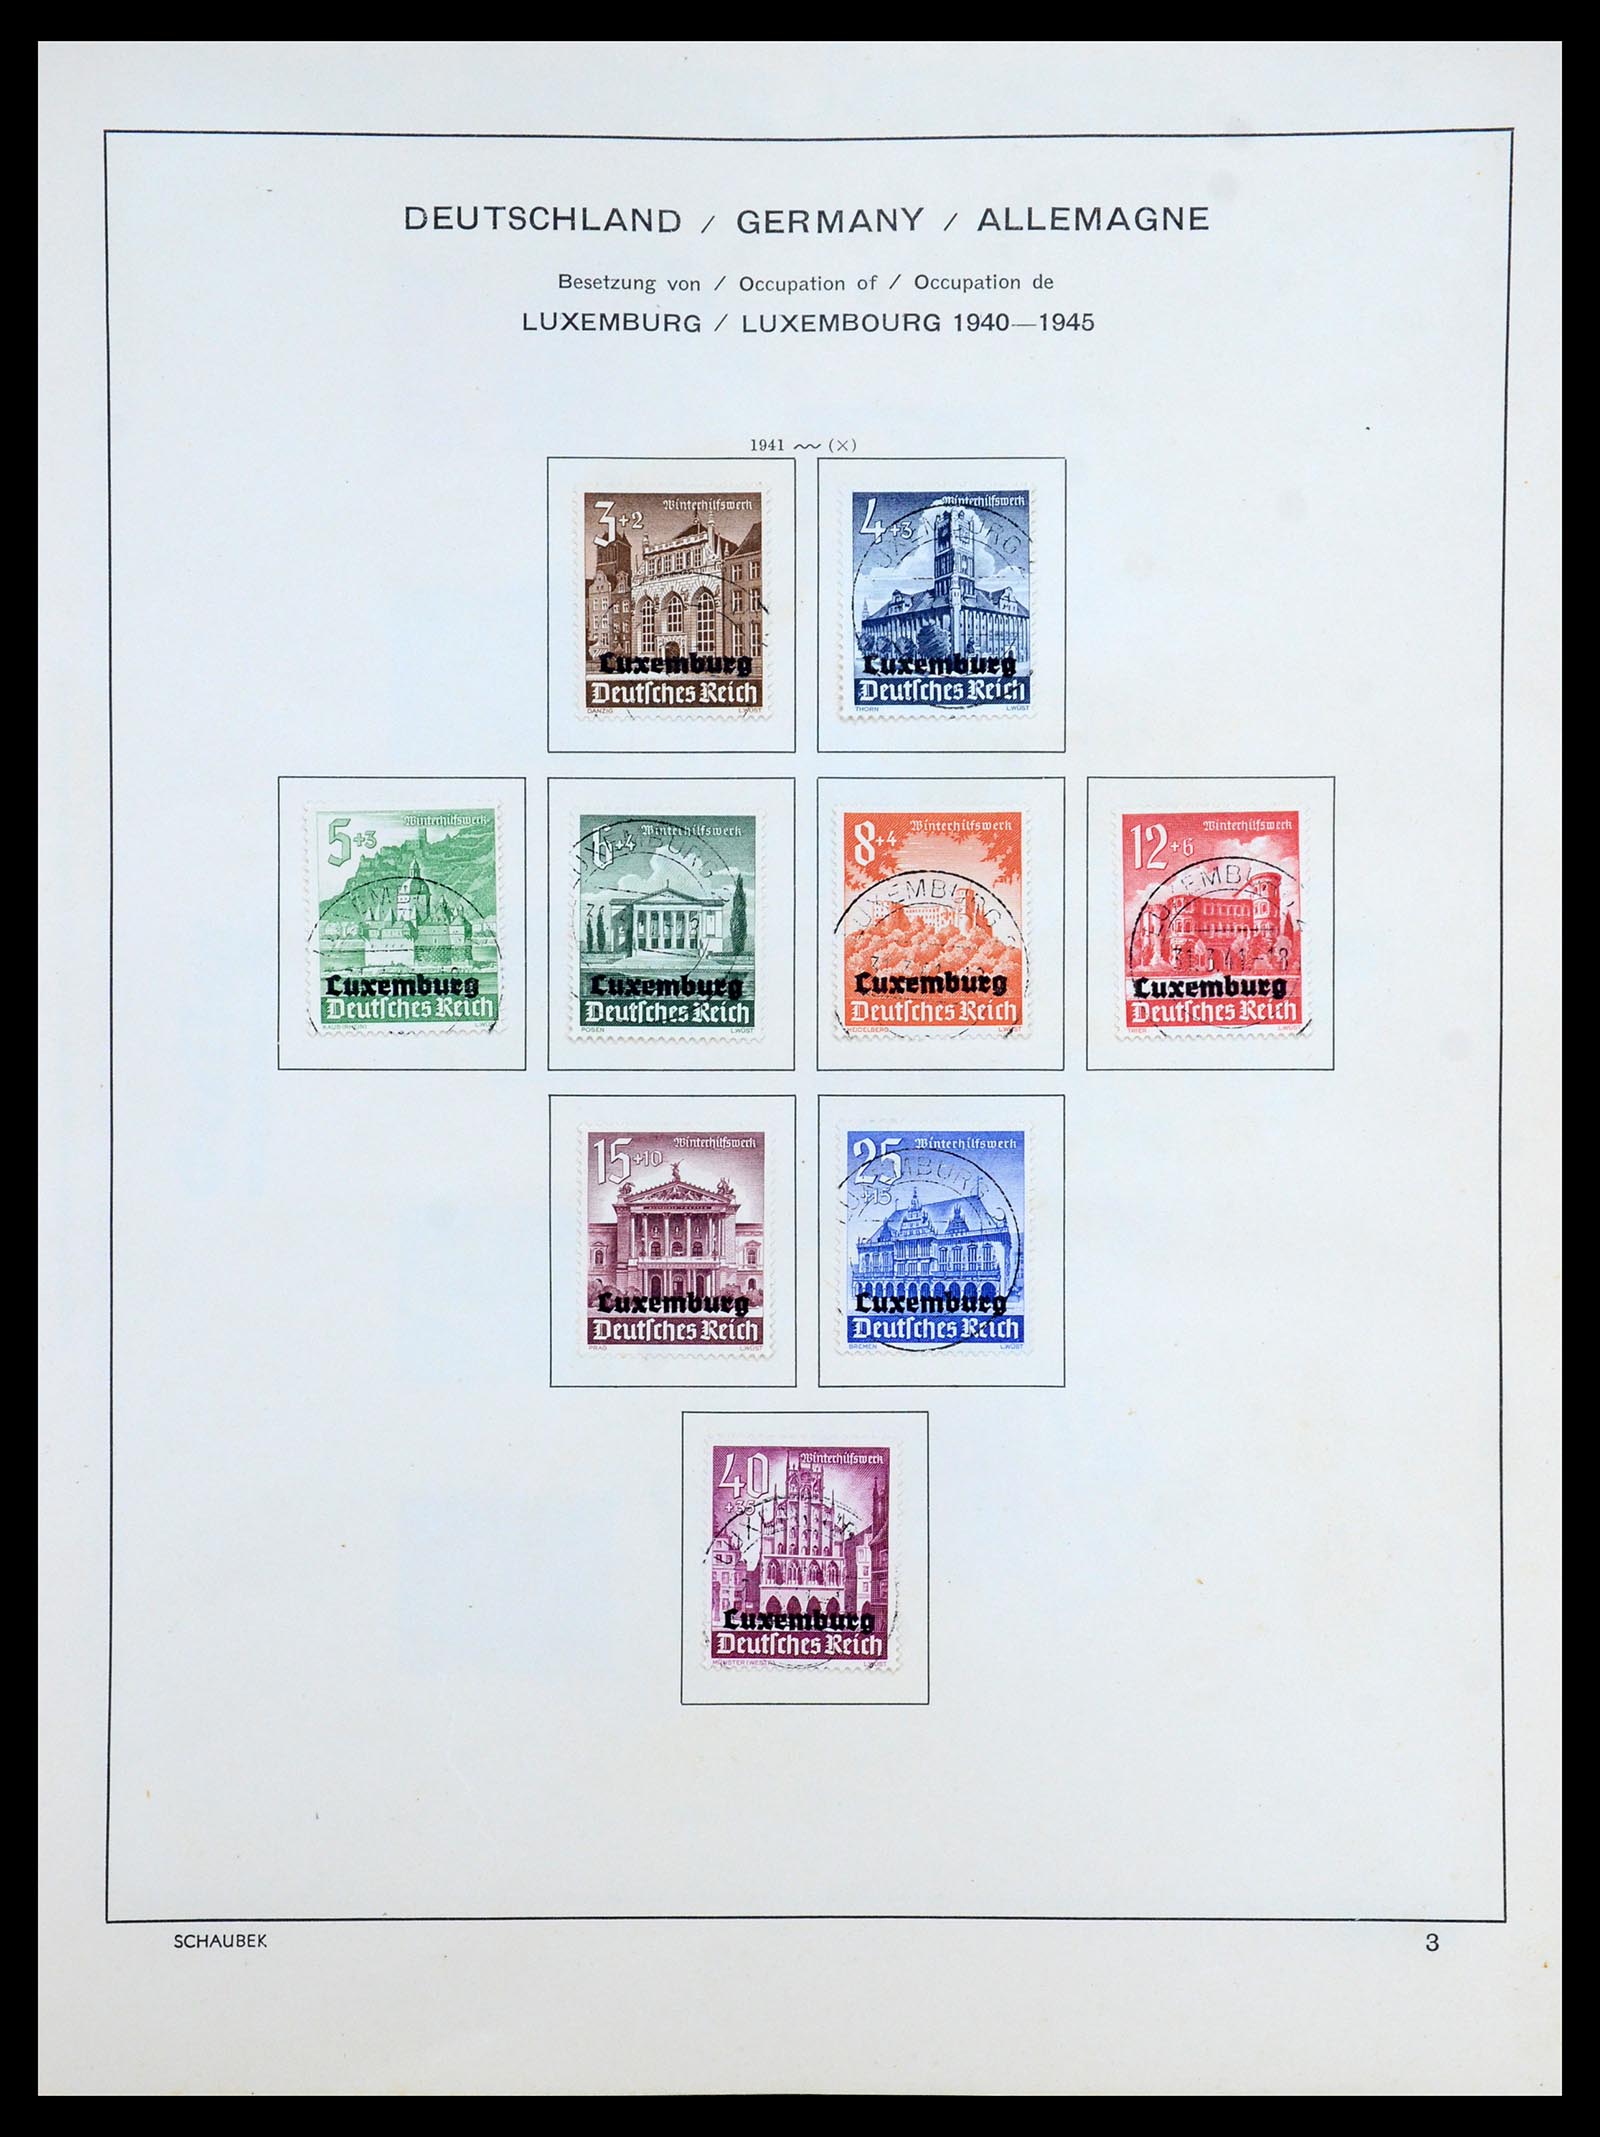 35964 006 - Stamp collection 35964 Germany occupations WW II 1939-1945.